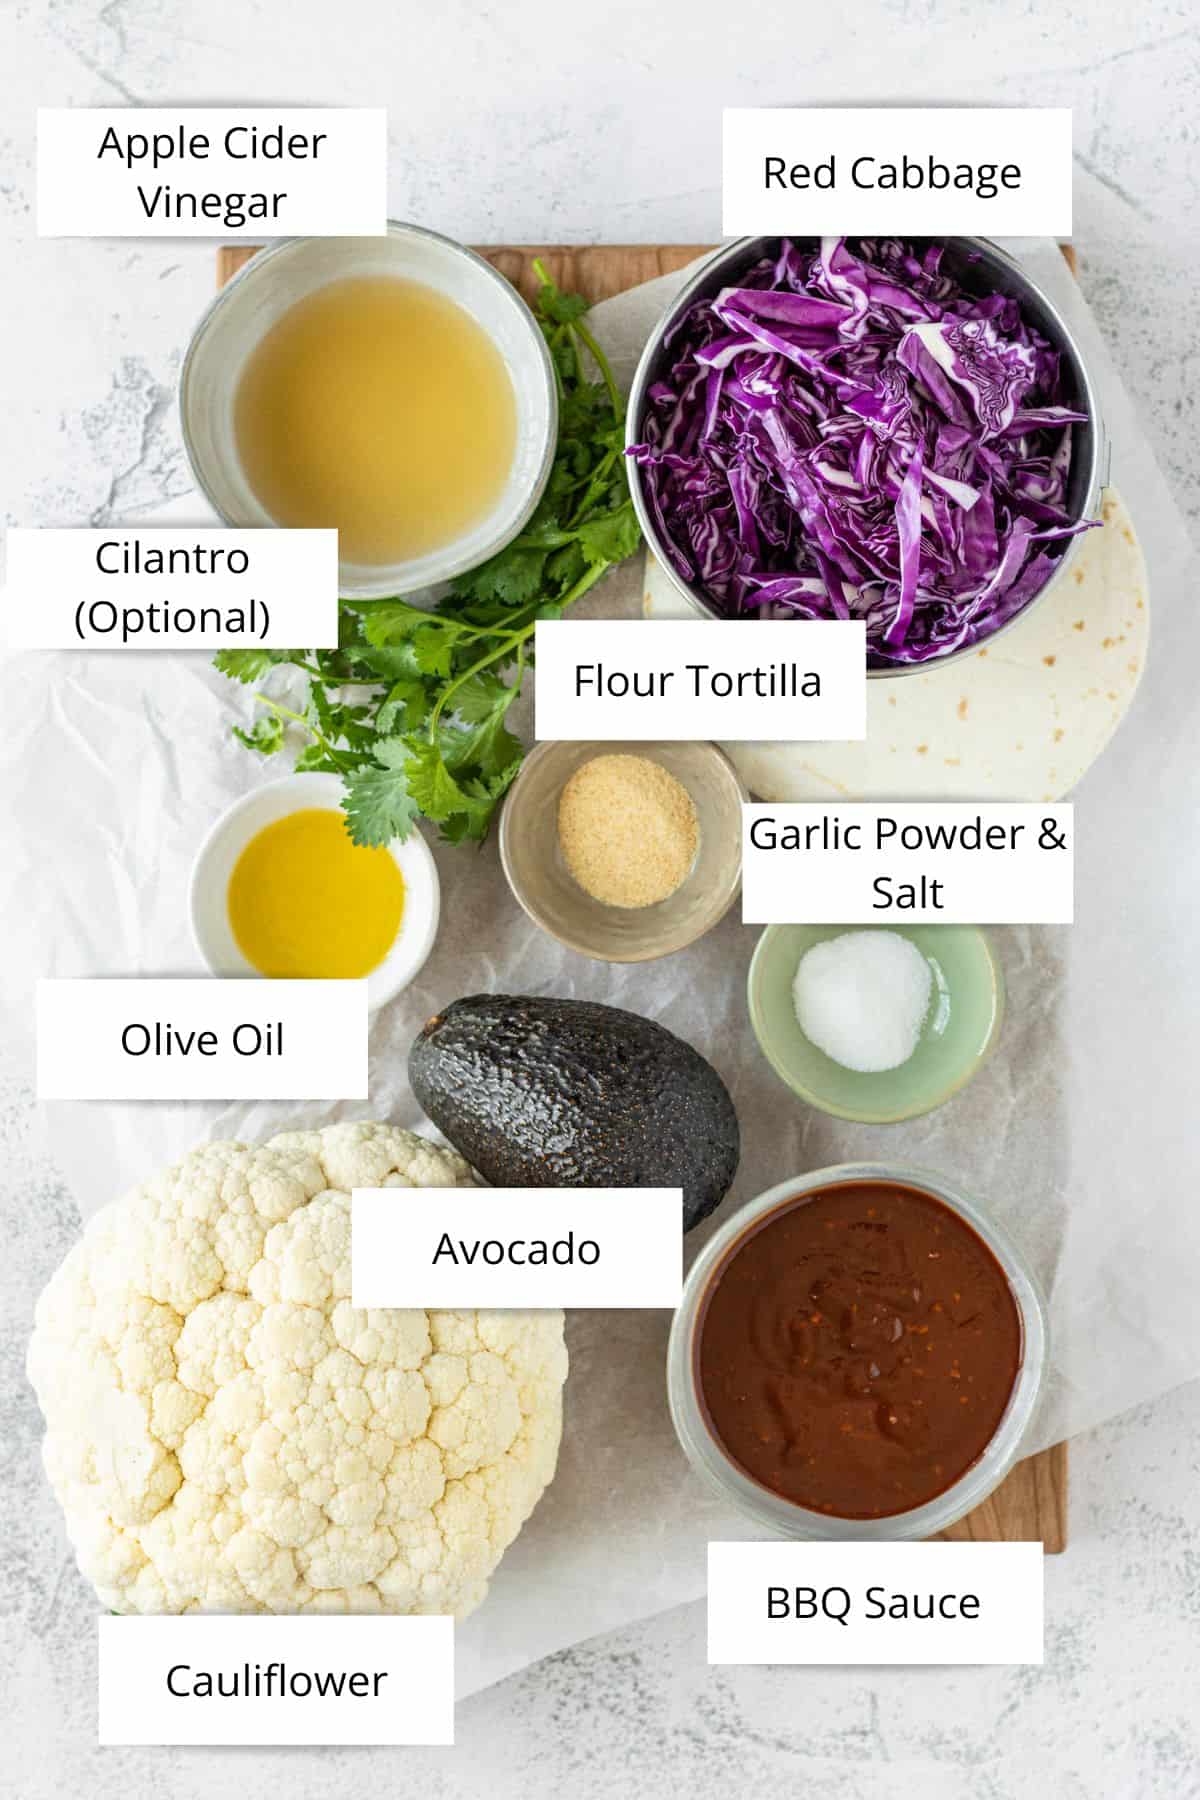 Overhead of a bowl of apple cider vinegar, sliced red cabbage, flour tortillas, pinch bowls of spices and oil, an avocado, a head of cauliflower and a bowl of barbecue sauce.